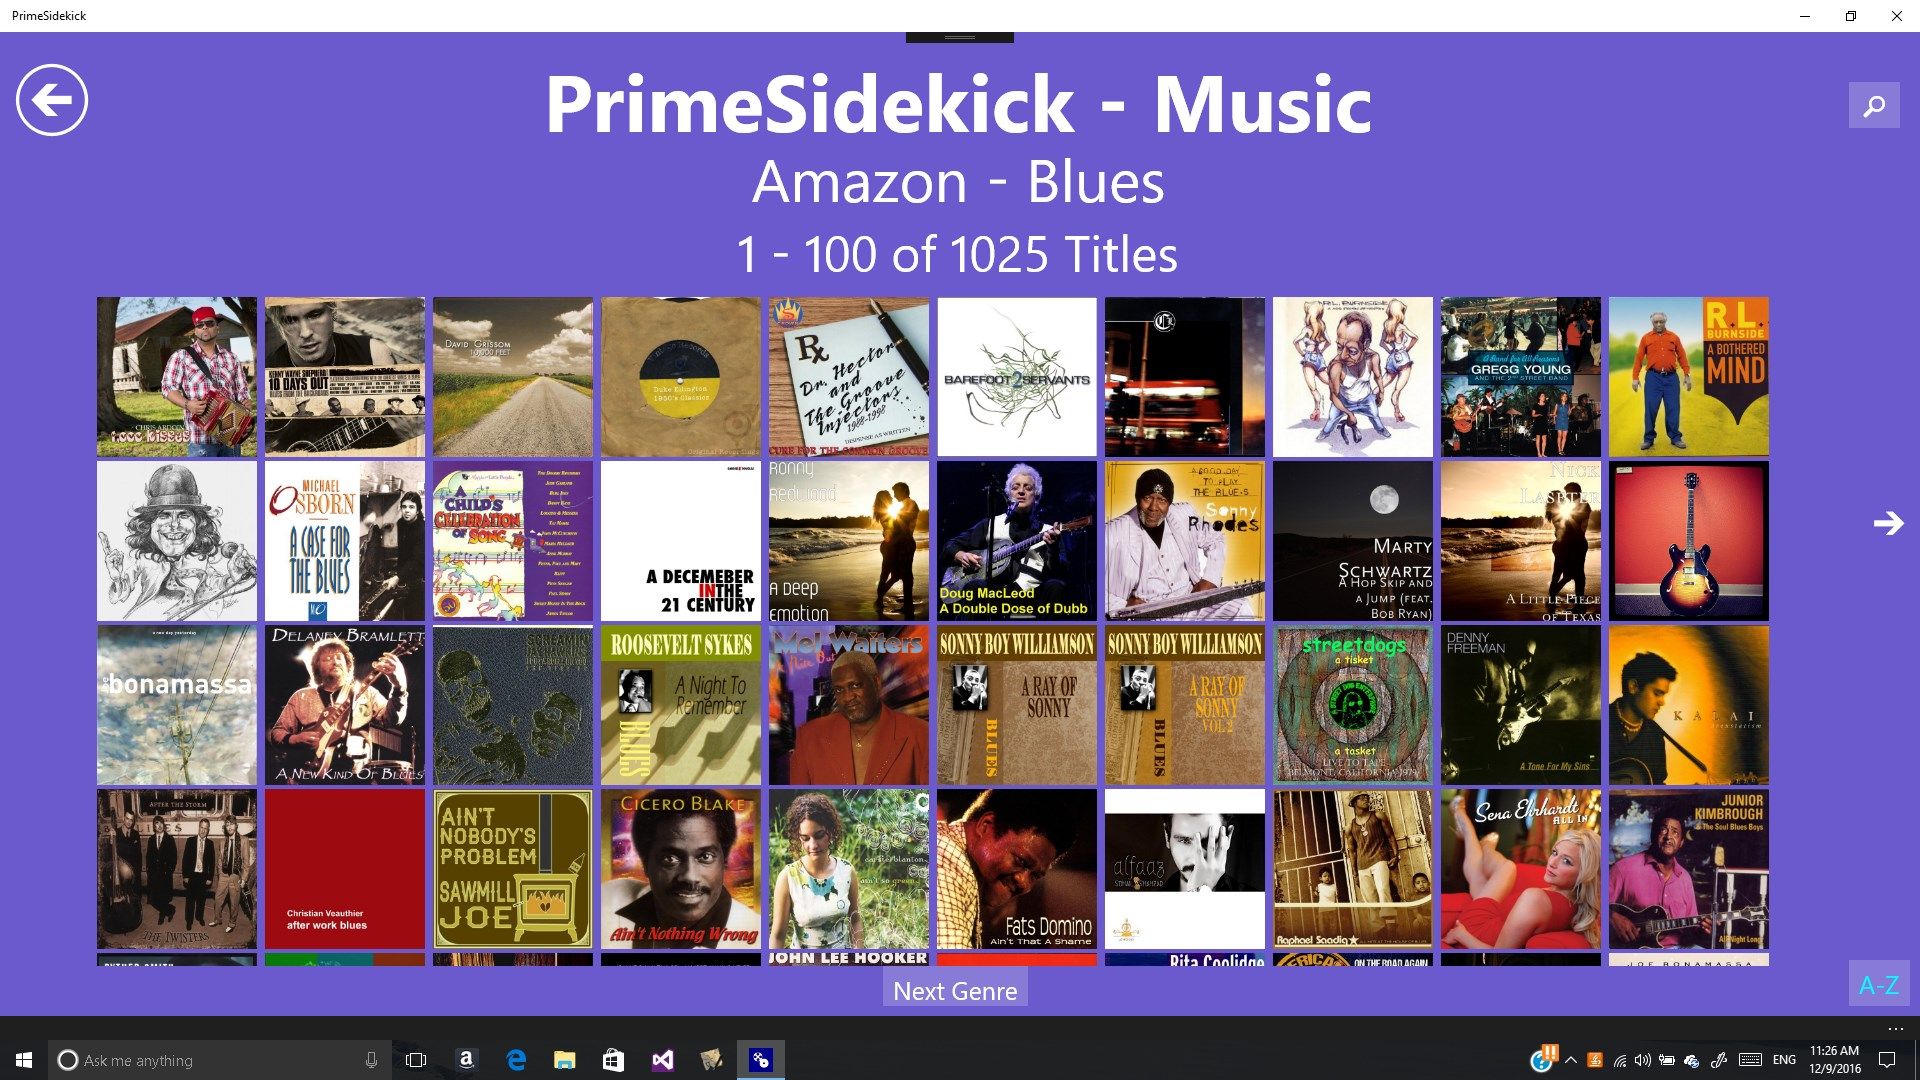 This screen allows the users to browse the titles available in the selected Amazon Prime Music genre. Tapping (or clicking) on any of the thumbnails will bring up the title details screen.